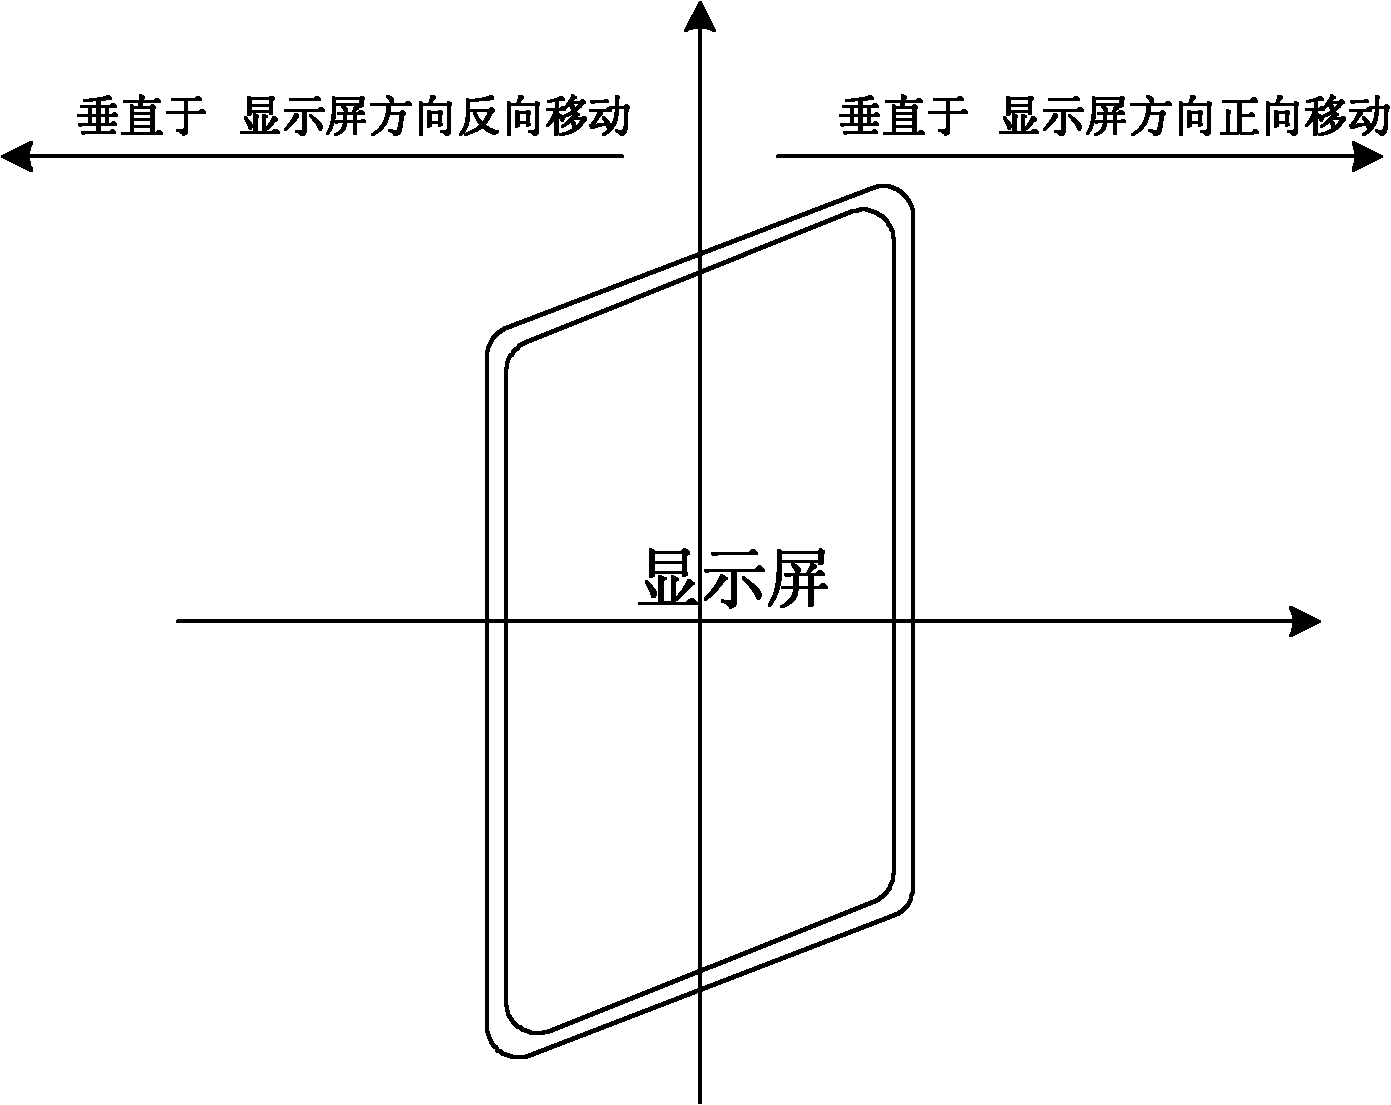 Anti-shaking method and device for portable equipment